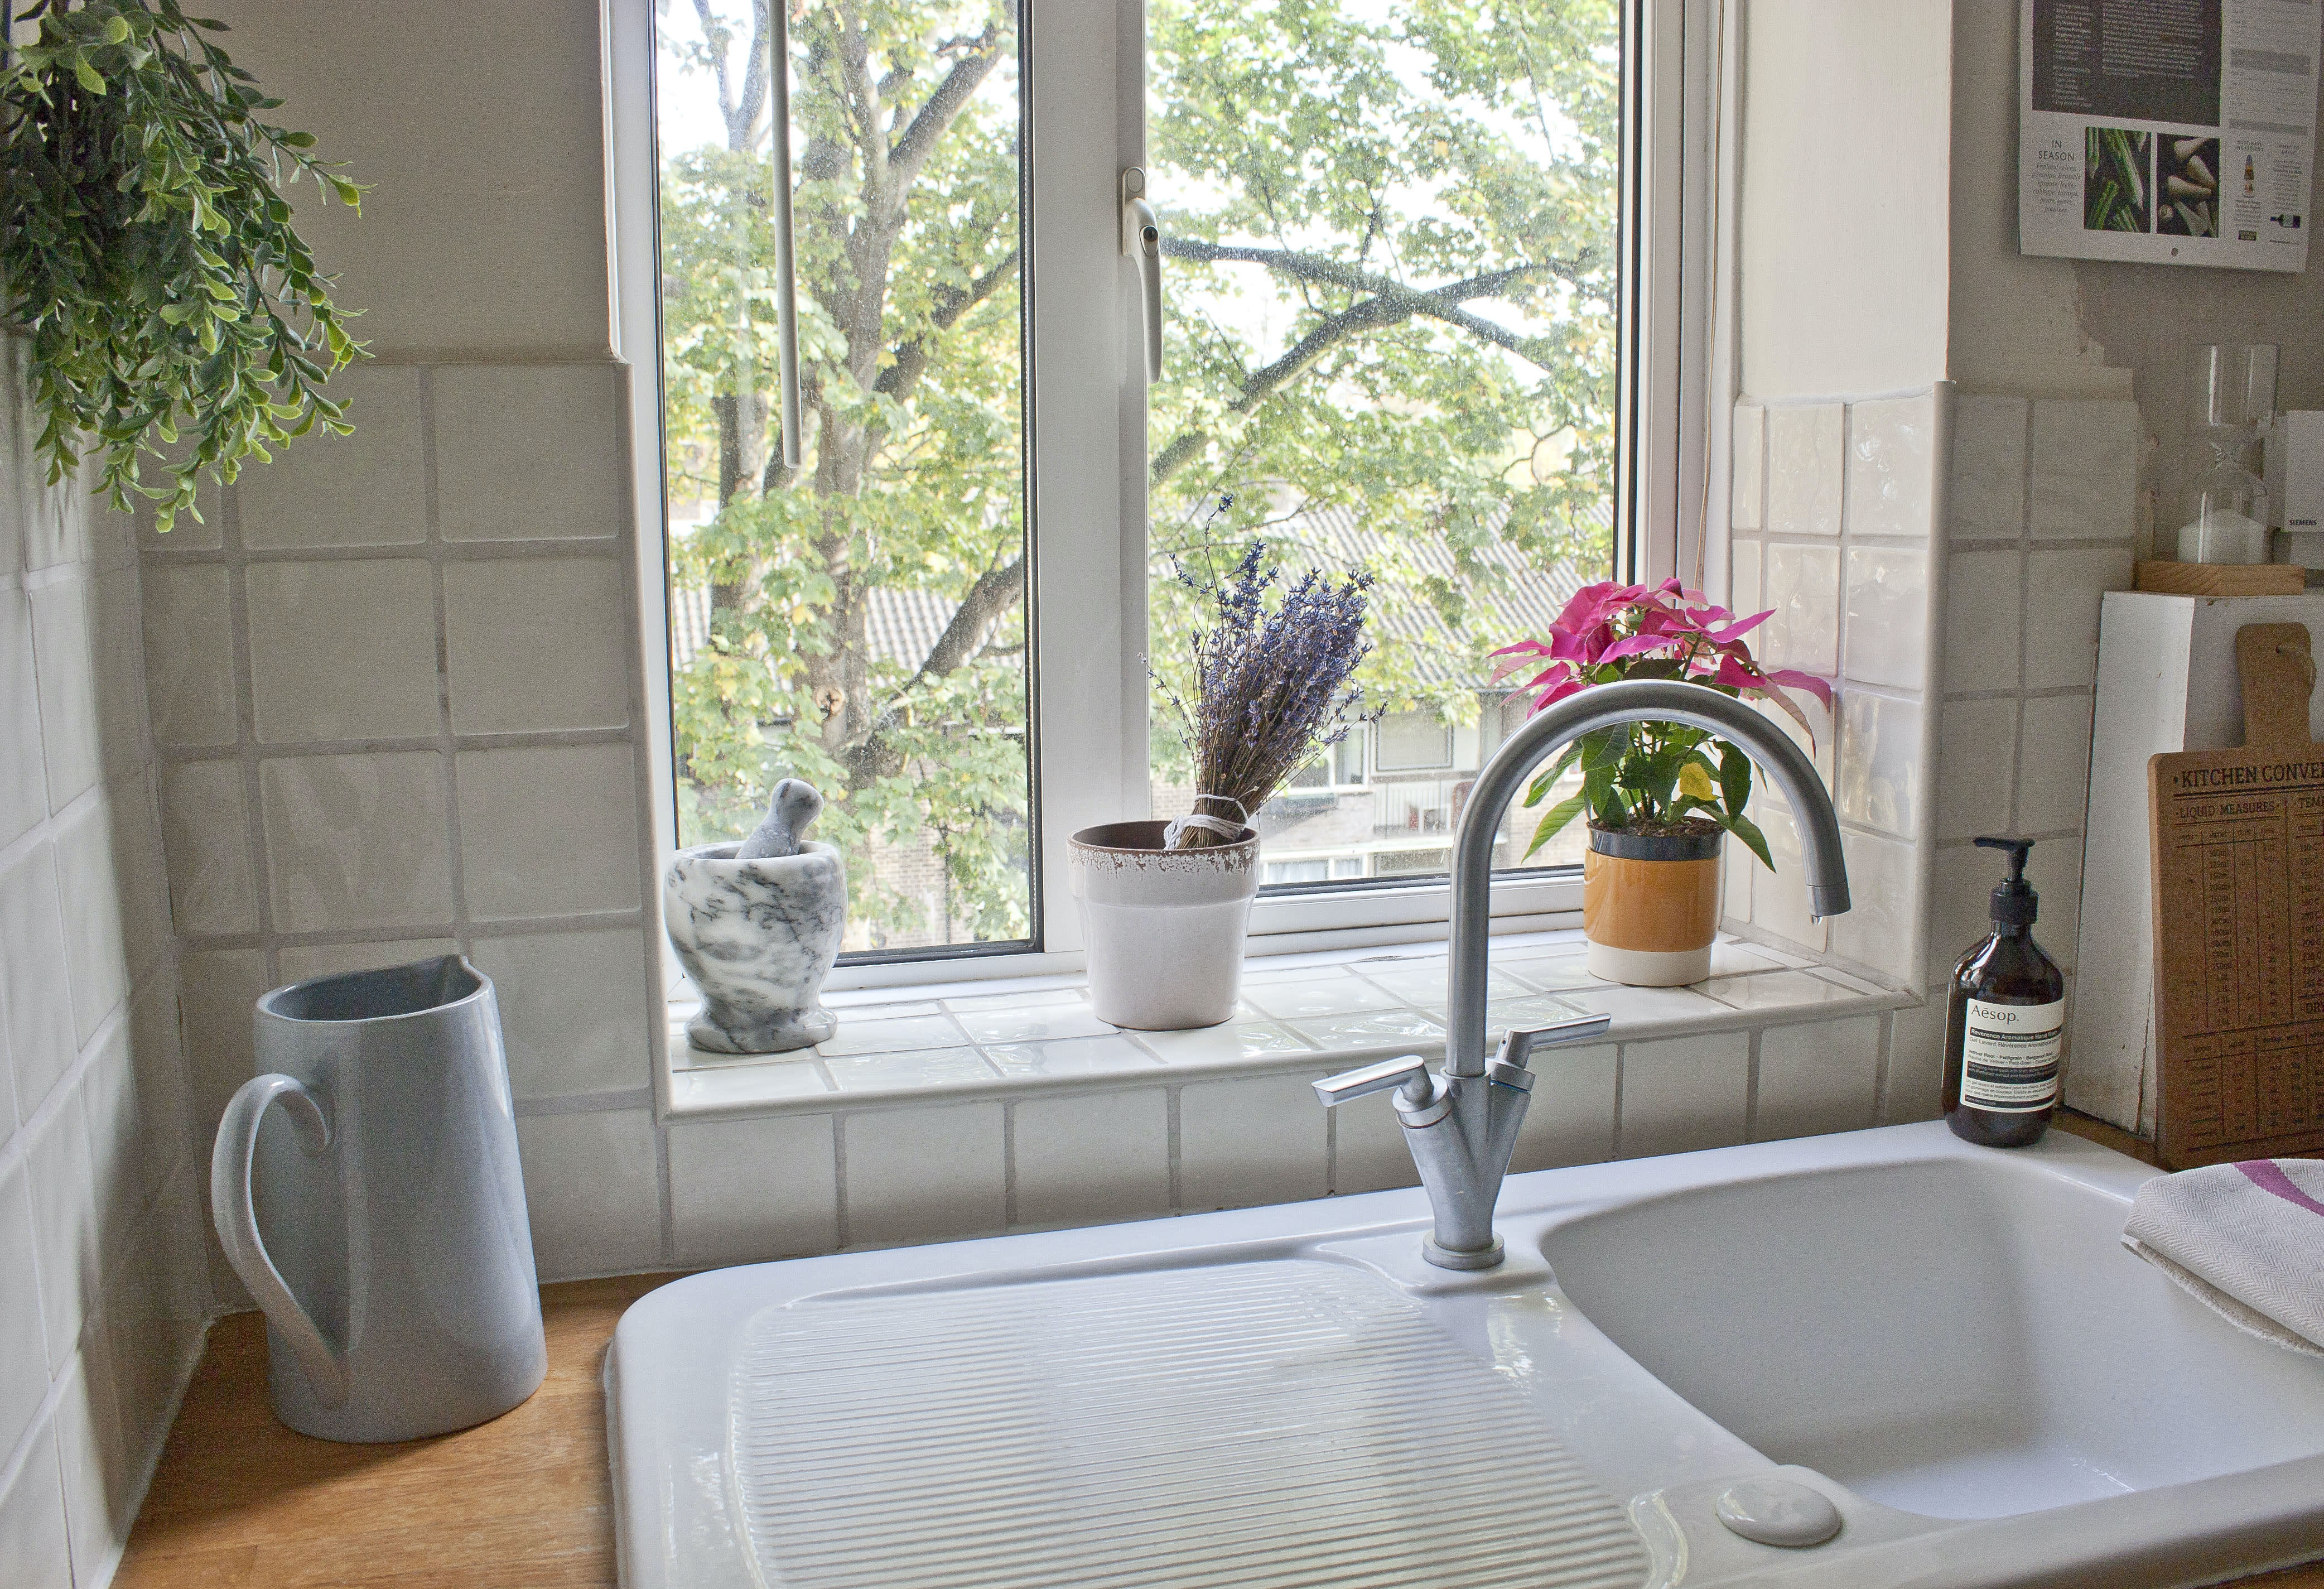 Window sill cleaning options? : r/CleaningTips